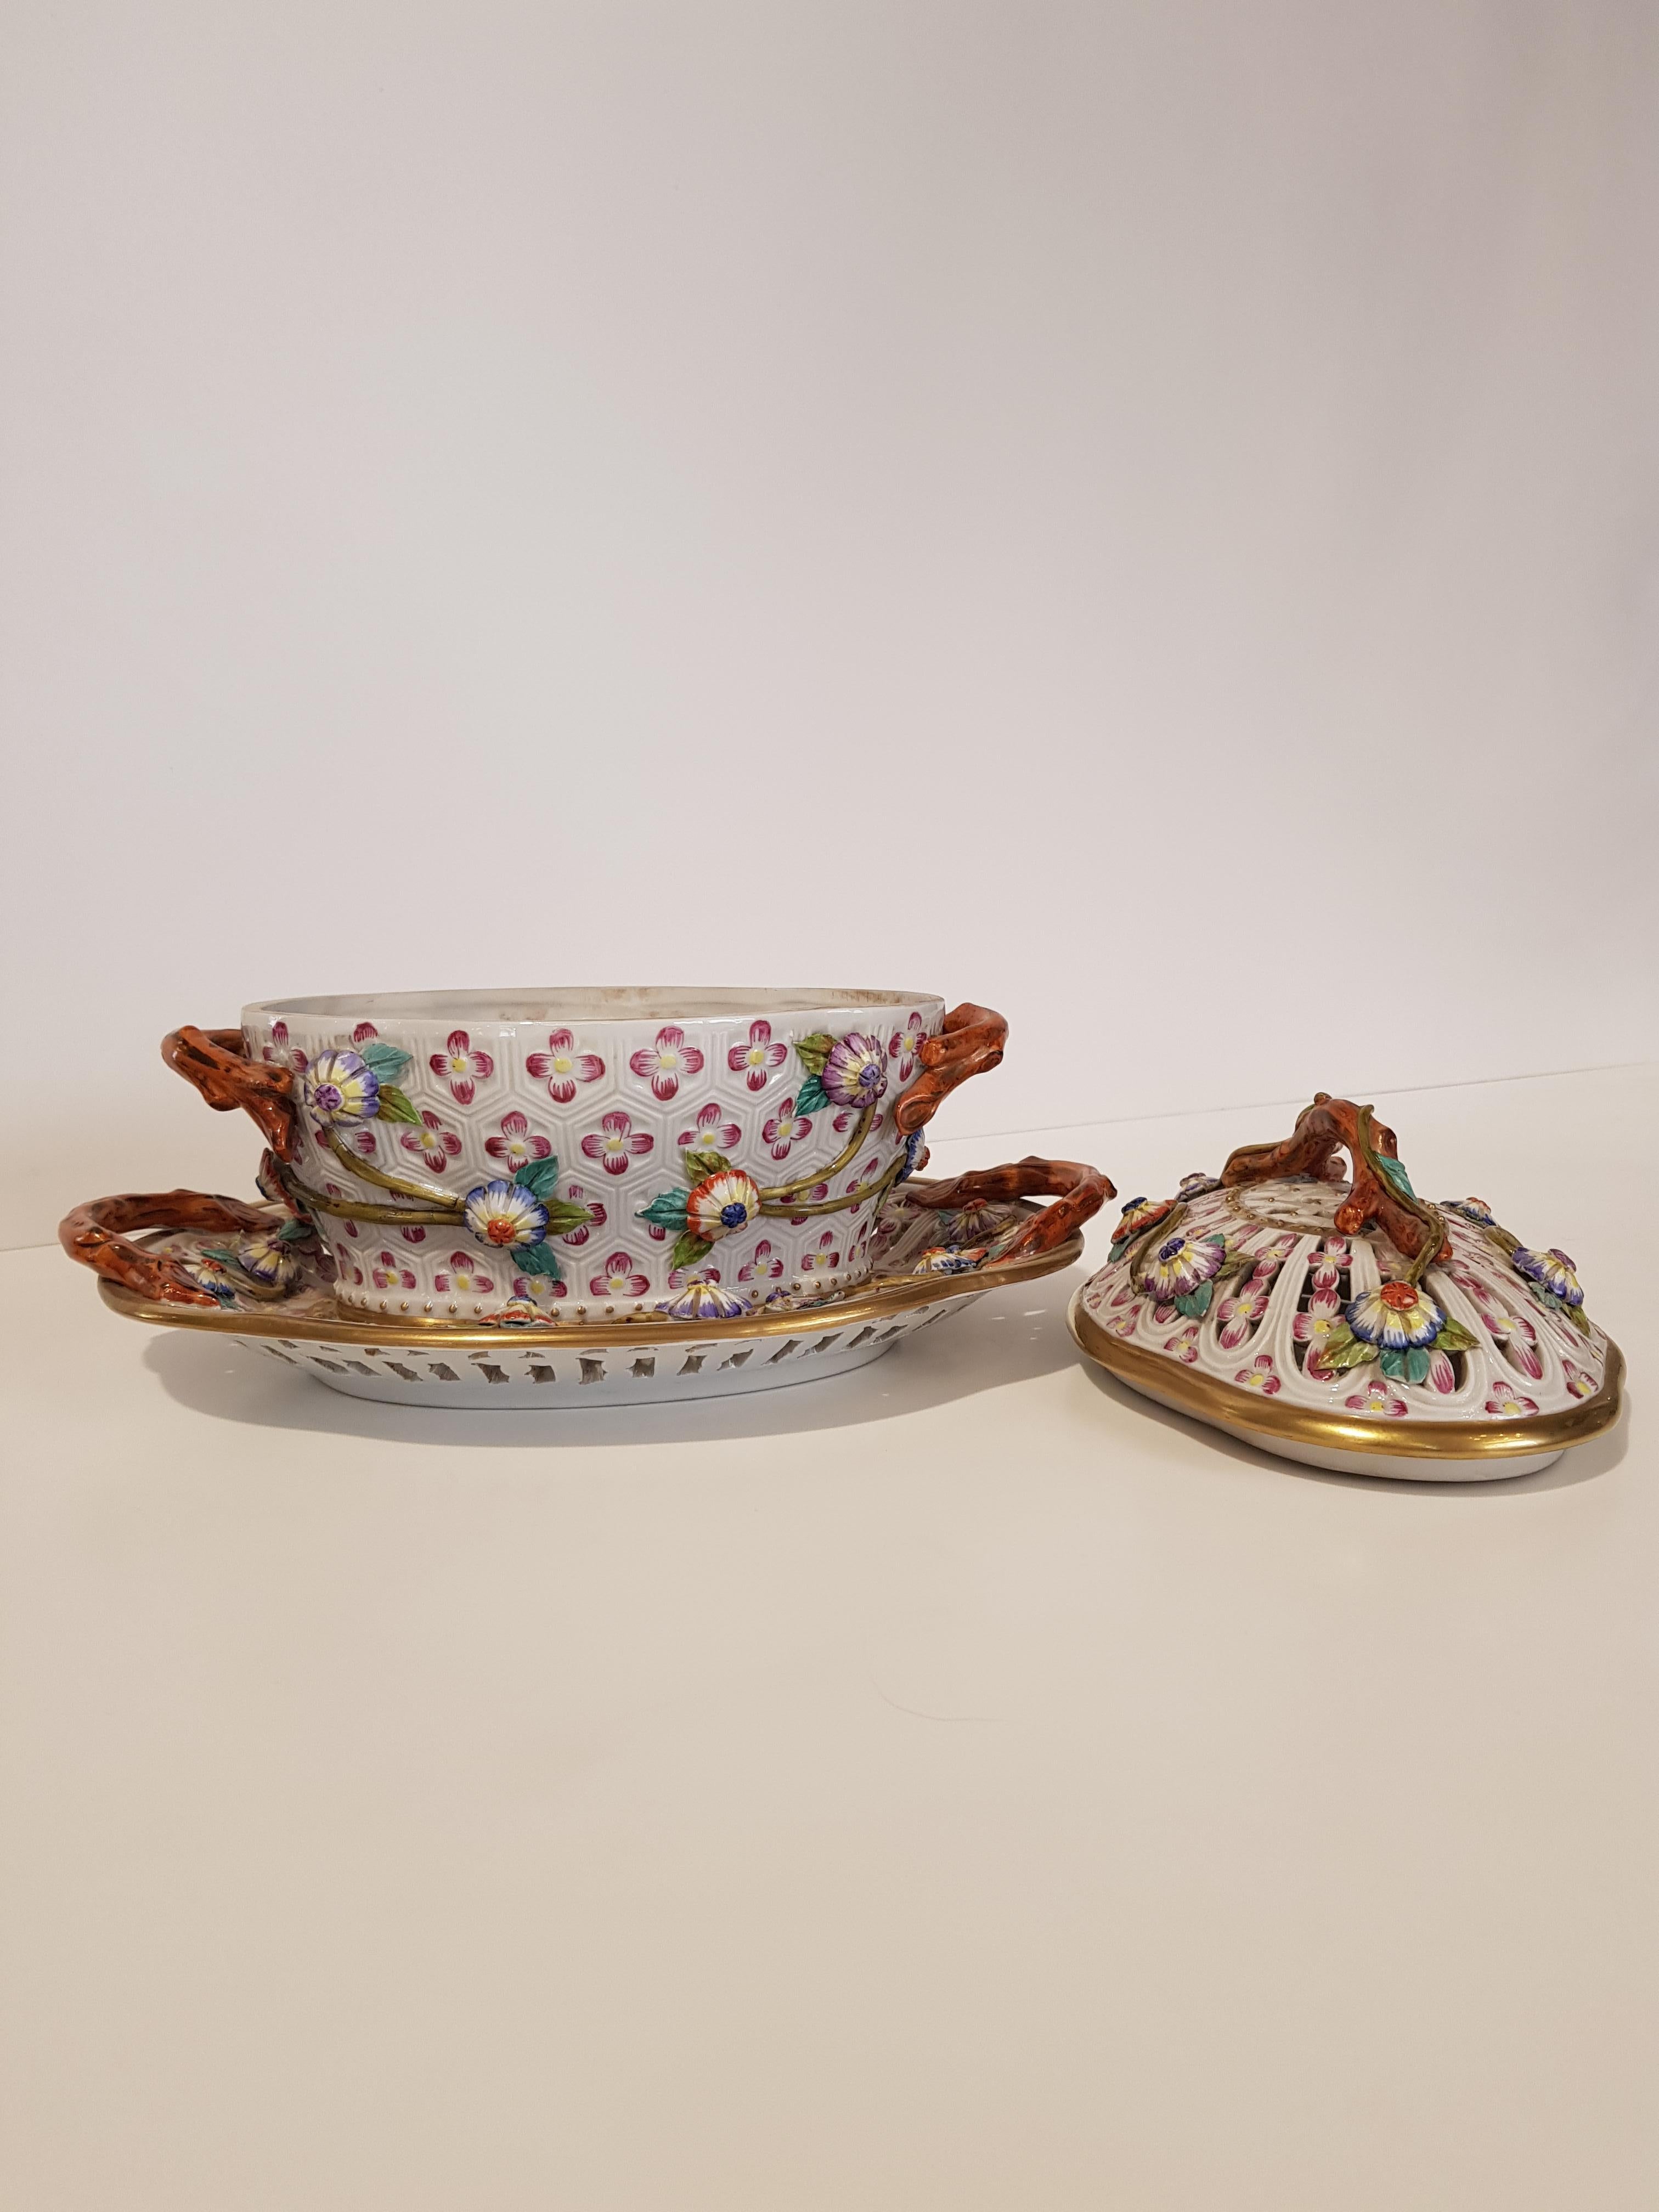 Original Italian Capo di Monte porcelain.
This Louis XVI style object is composed by 3 elements, a perforated lid with handle, a container with handles, and a perforated plate with handles, all finely realized and hand decorated with ancient